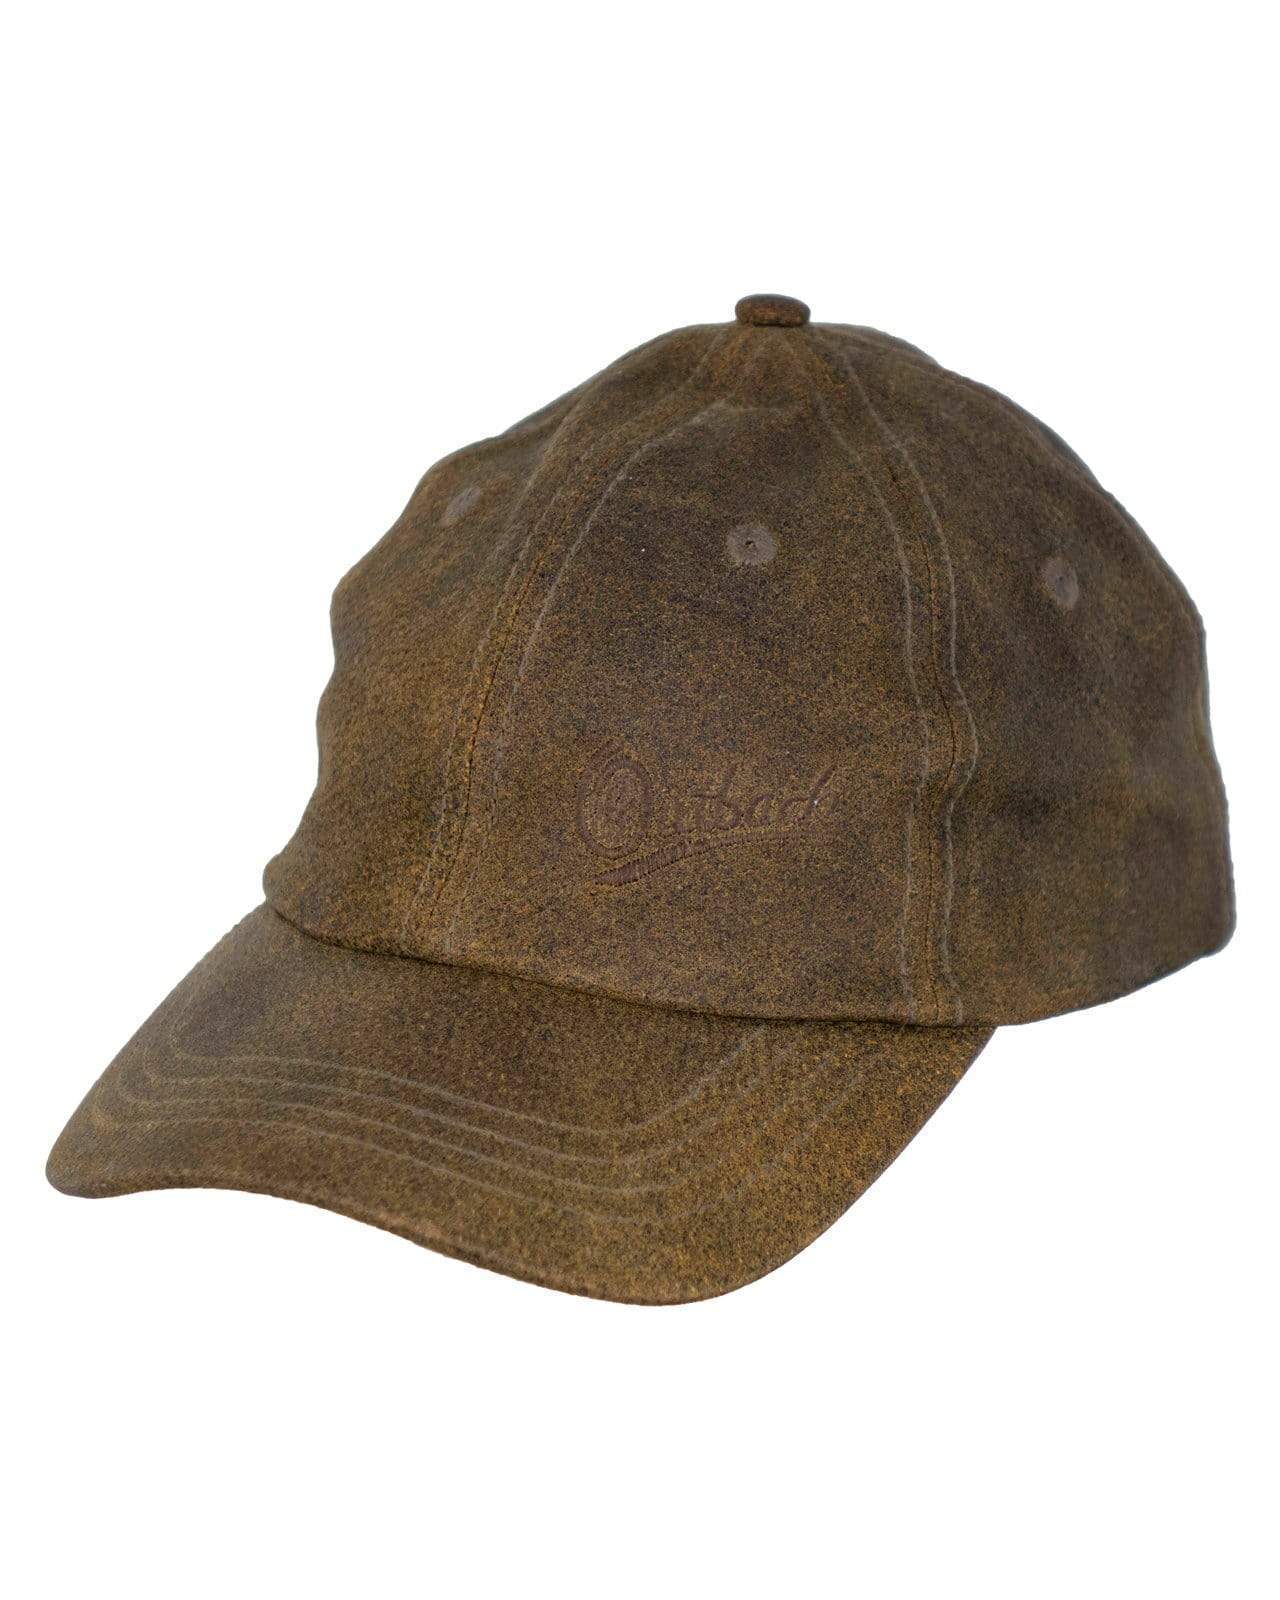 Outback Trading Company Leather Slugger Cap Brown / ONE 1450-BRN-ONE 089043191098 Hats